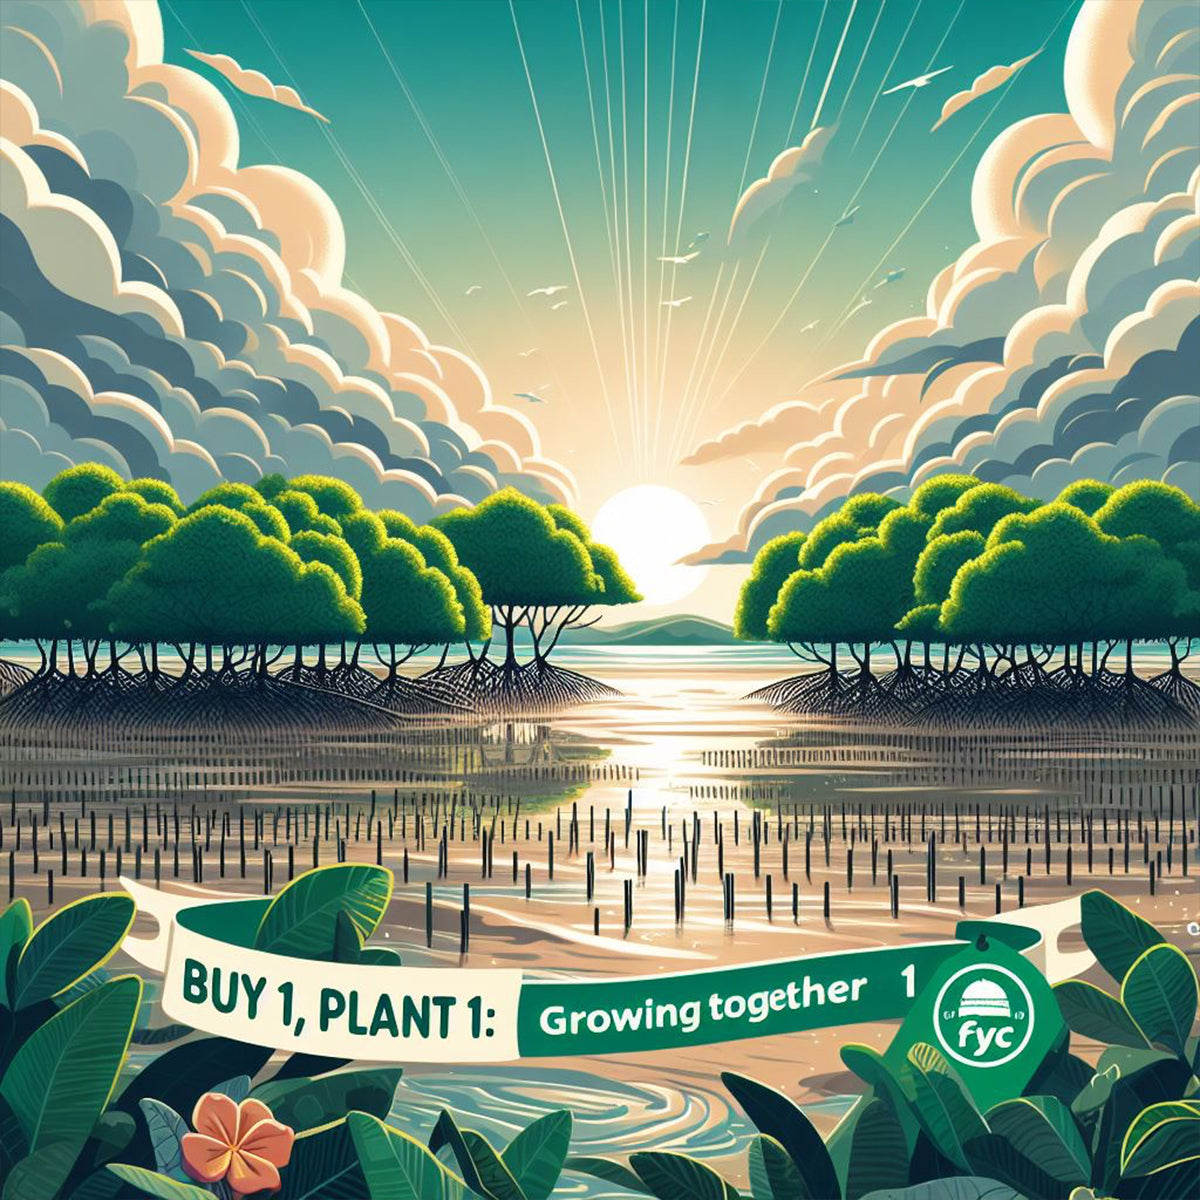 Find Your Coast Buy 1 Plant 1